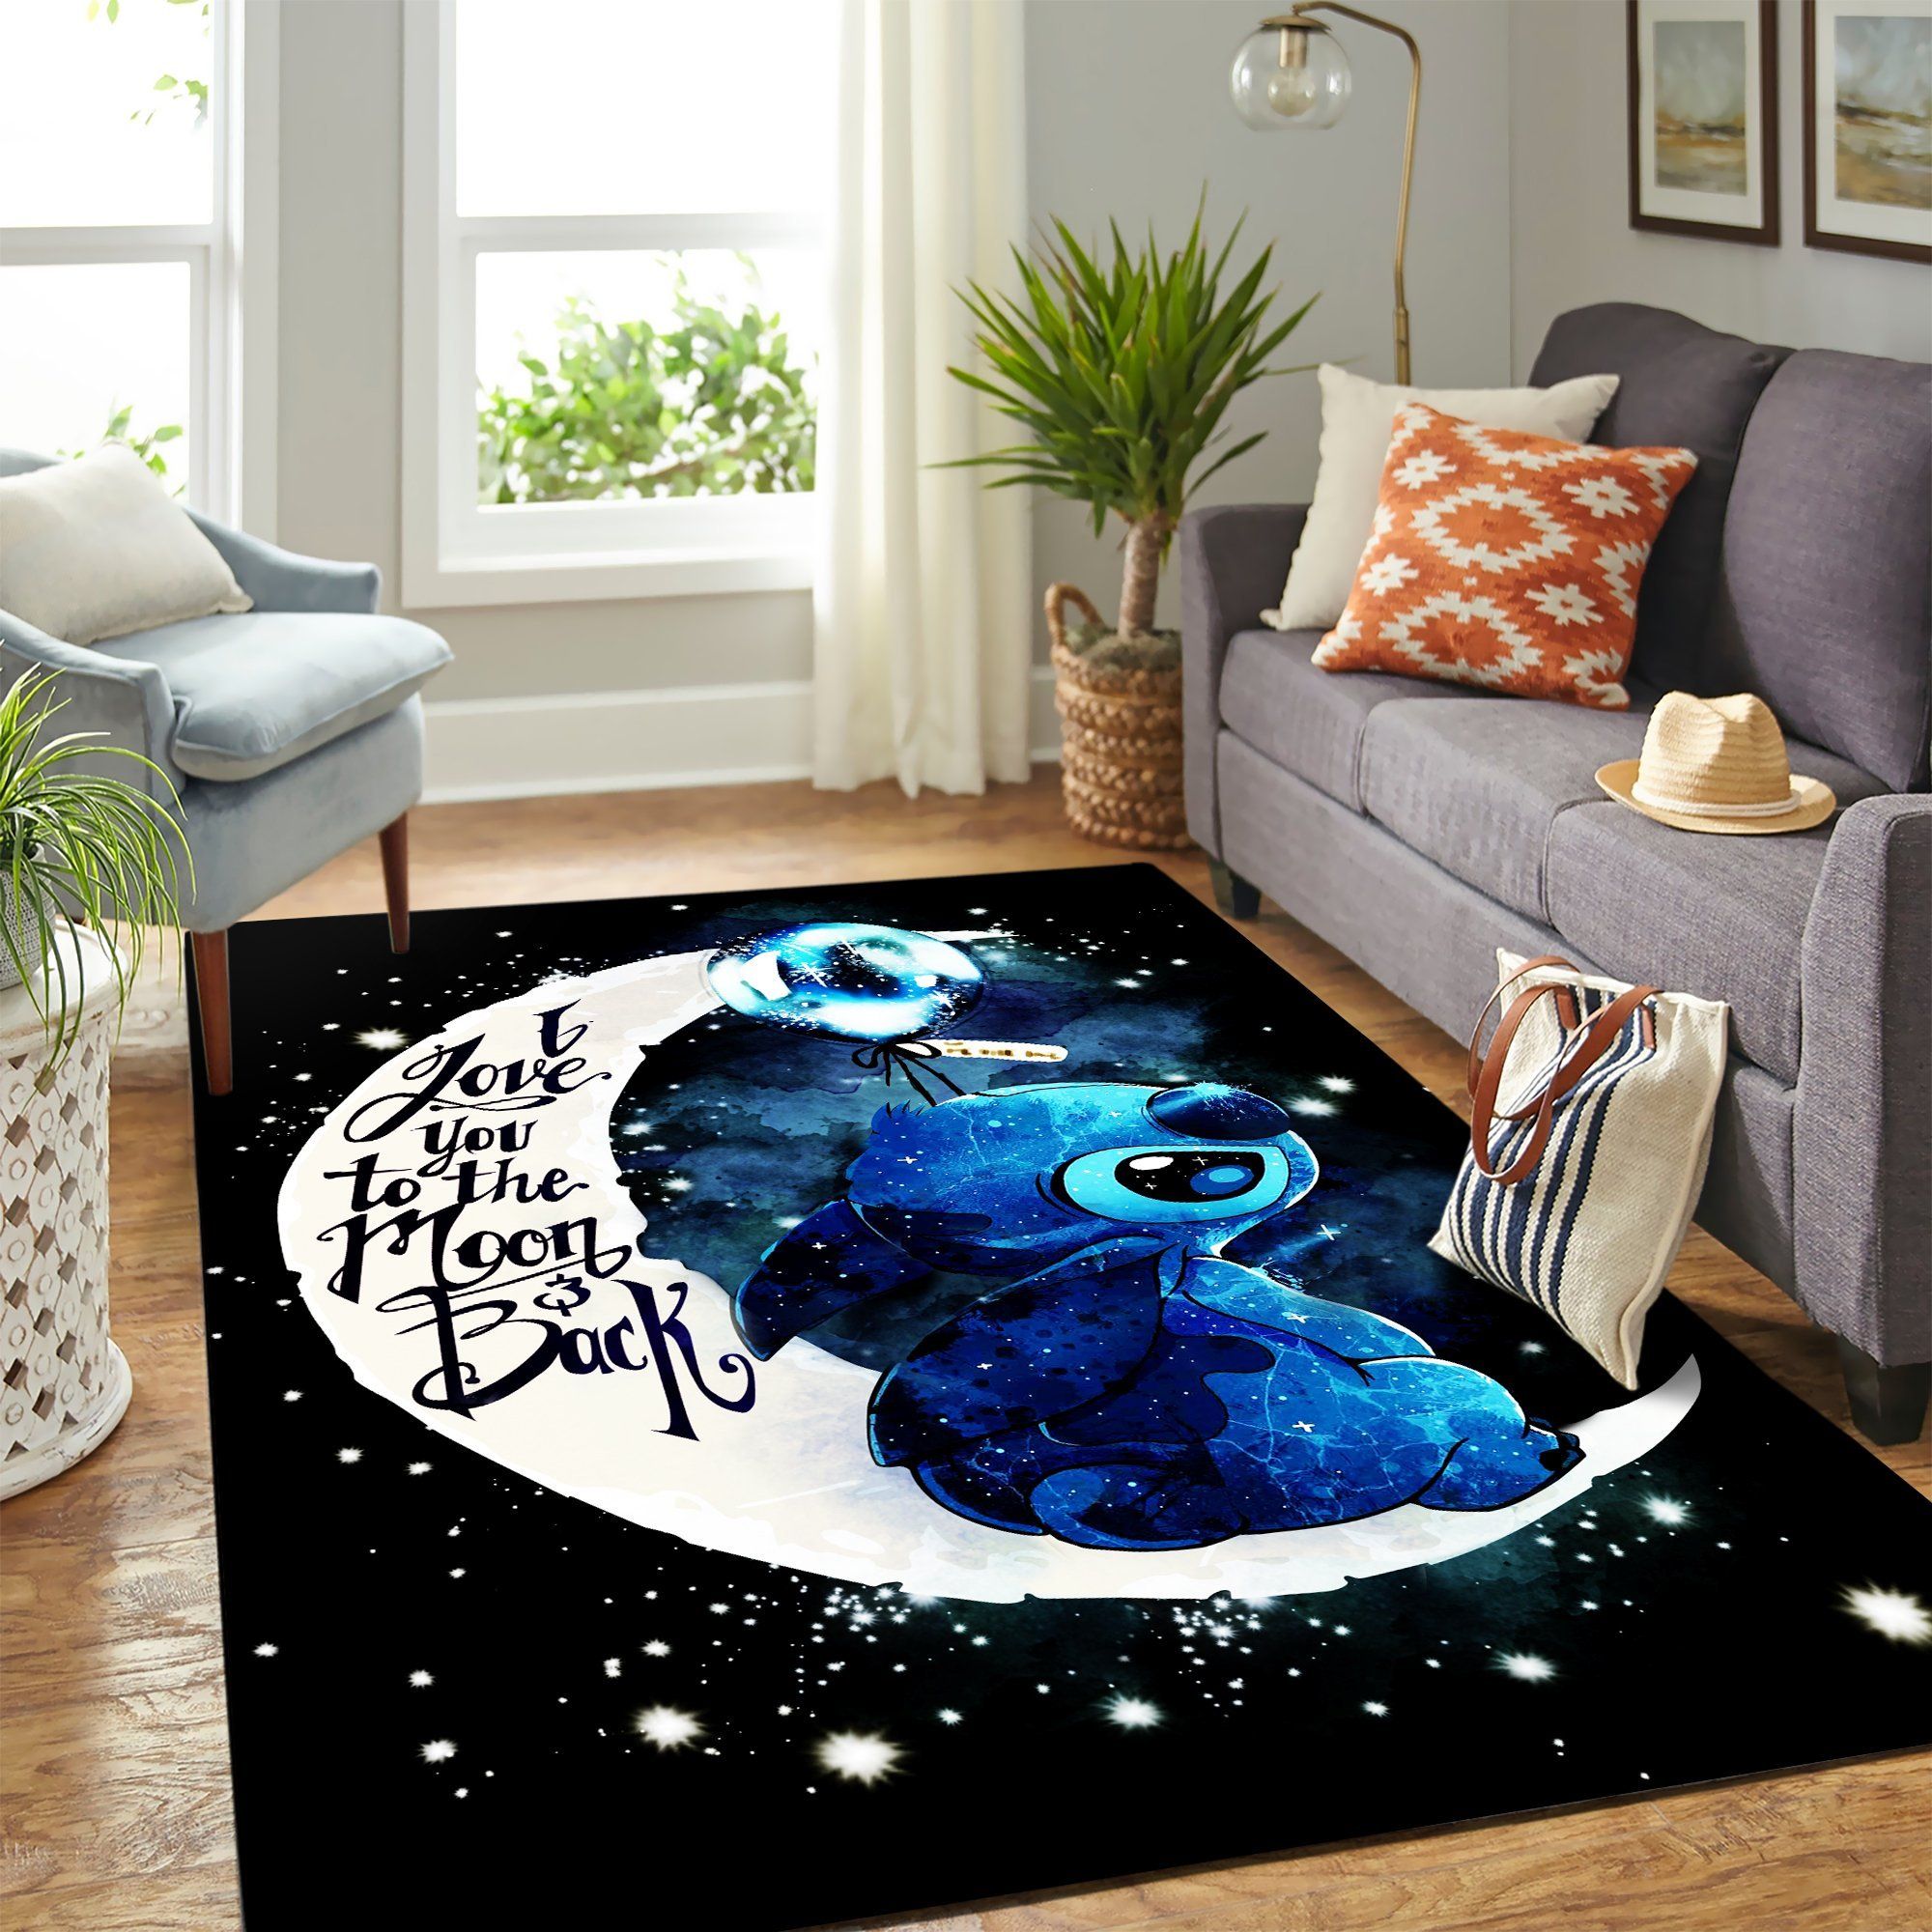 Stitch Moon And Back Cute Carpet Floor Area Rug - Bedroom Living Room Decor Home Decor - Indoor Outdoor Rugs